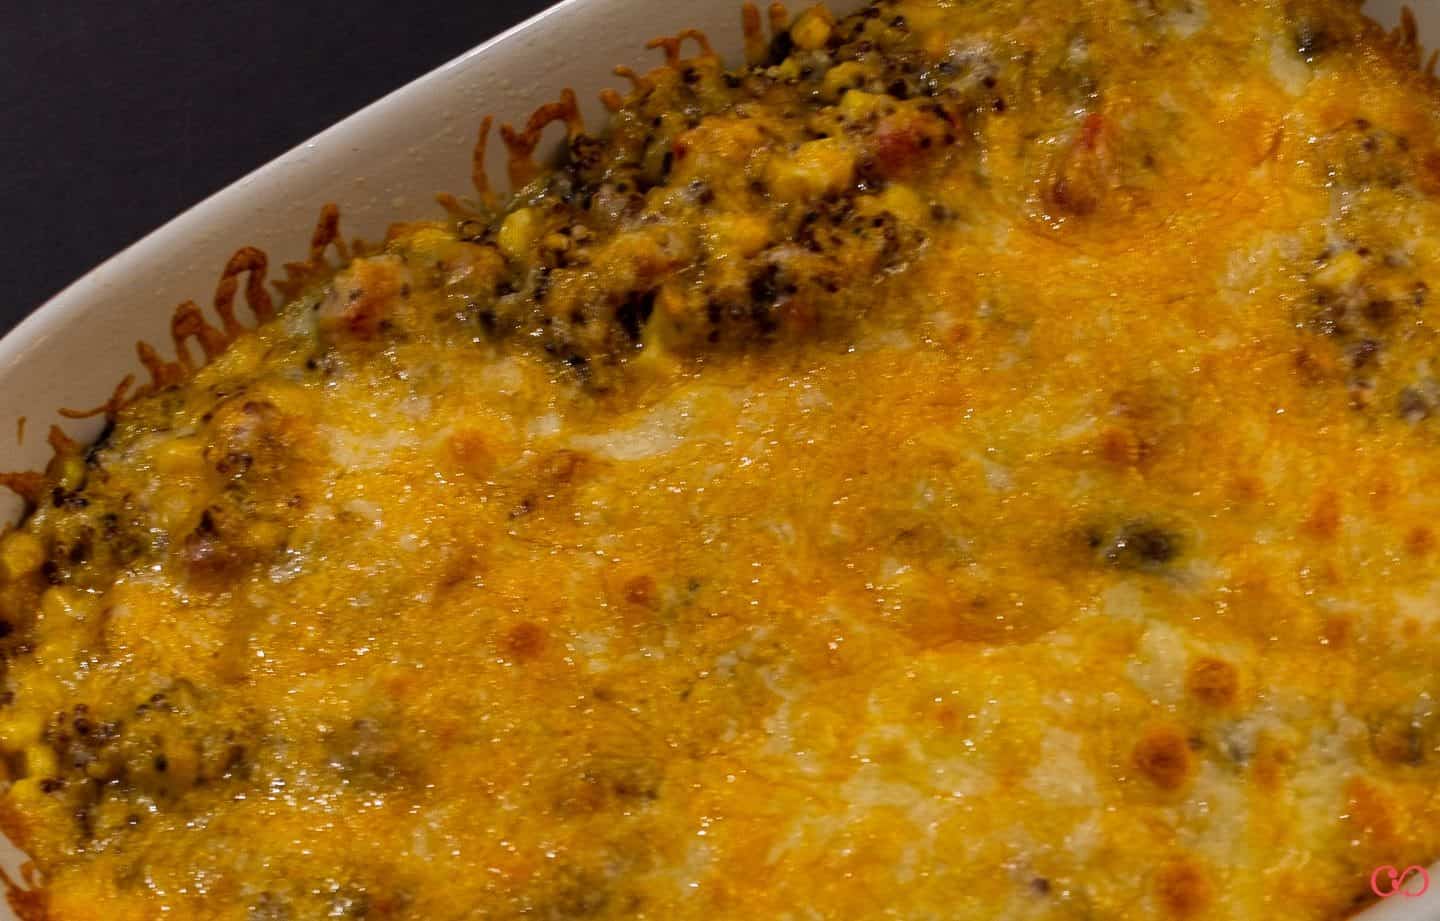 Gluten free Cowboy Caviar Casserole - fresh out of the oven